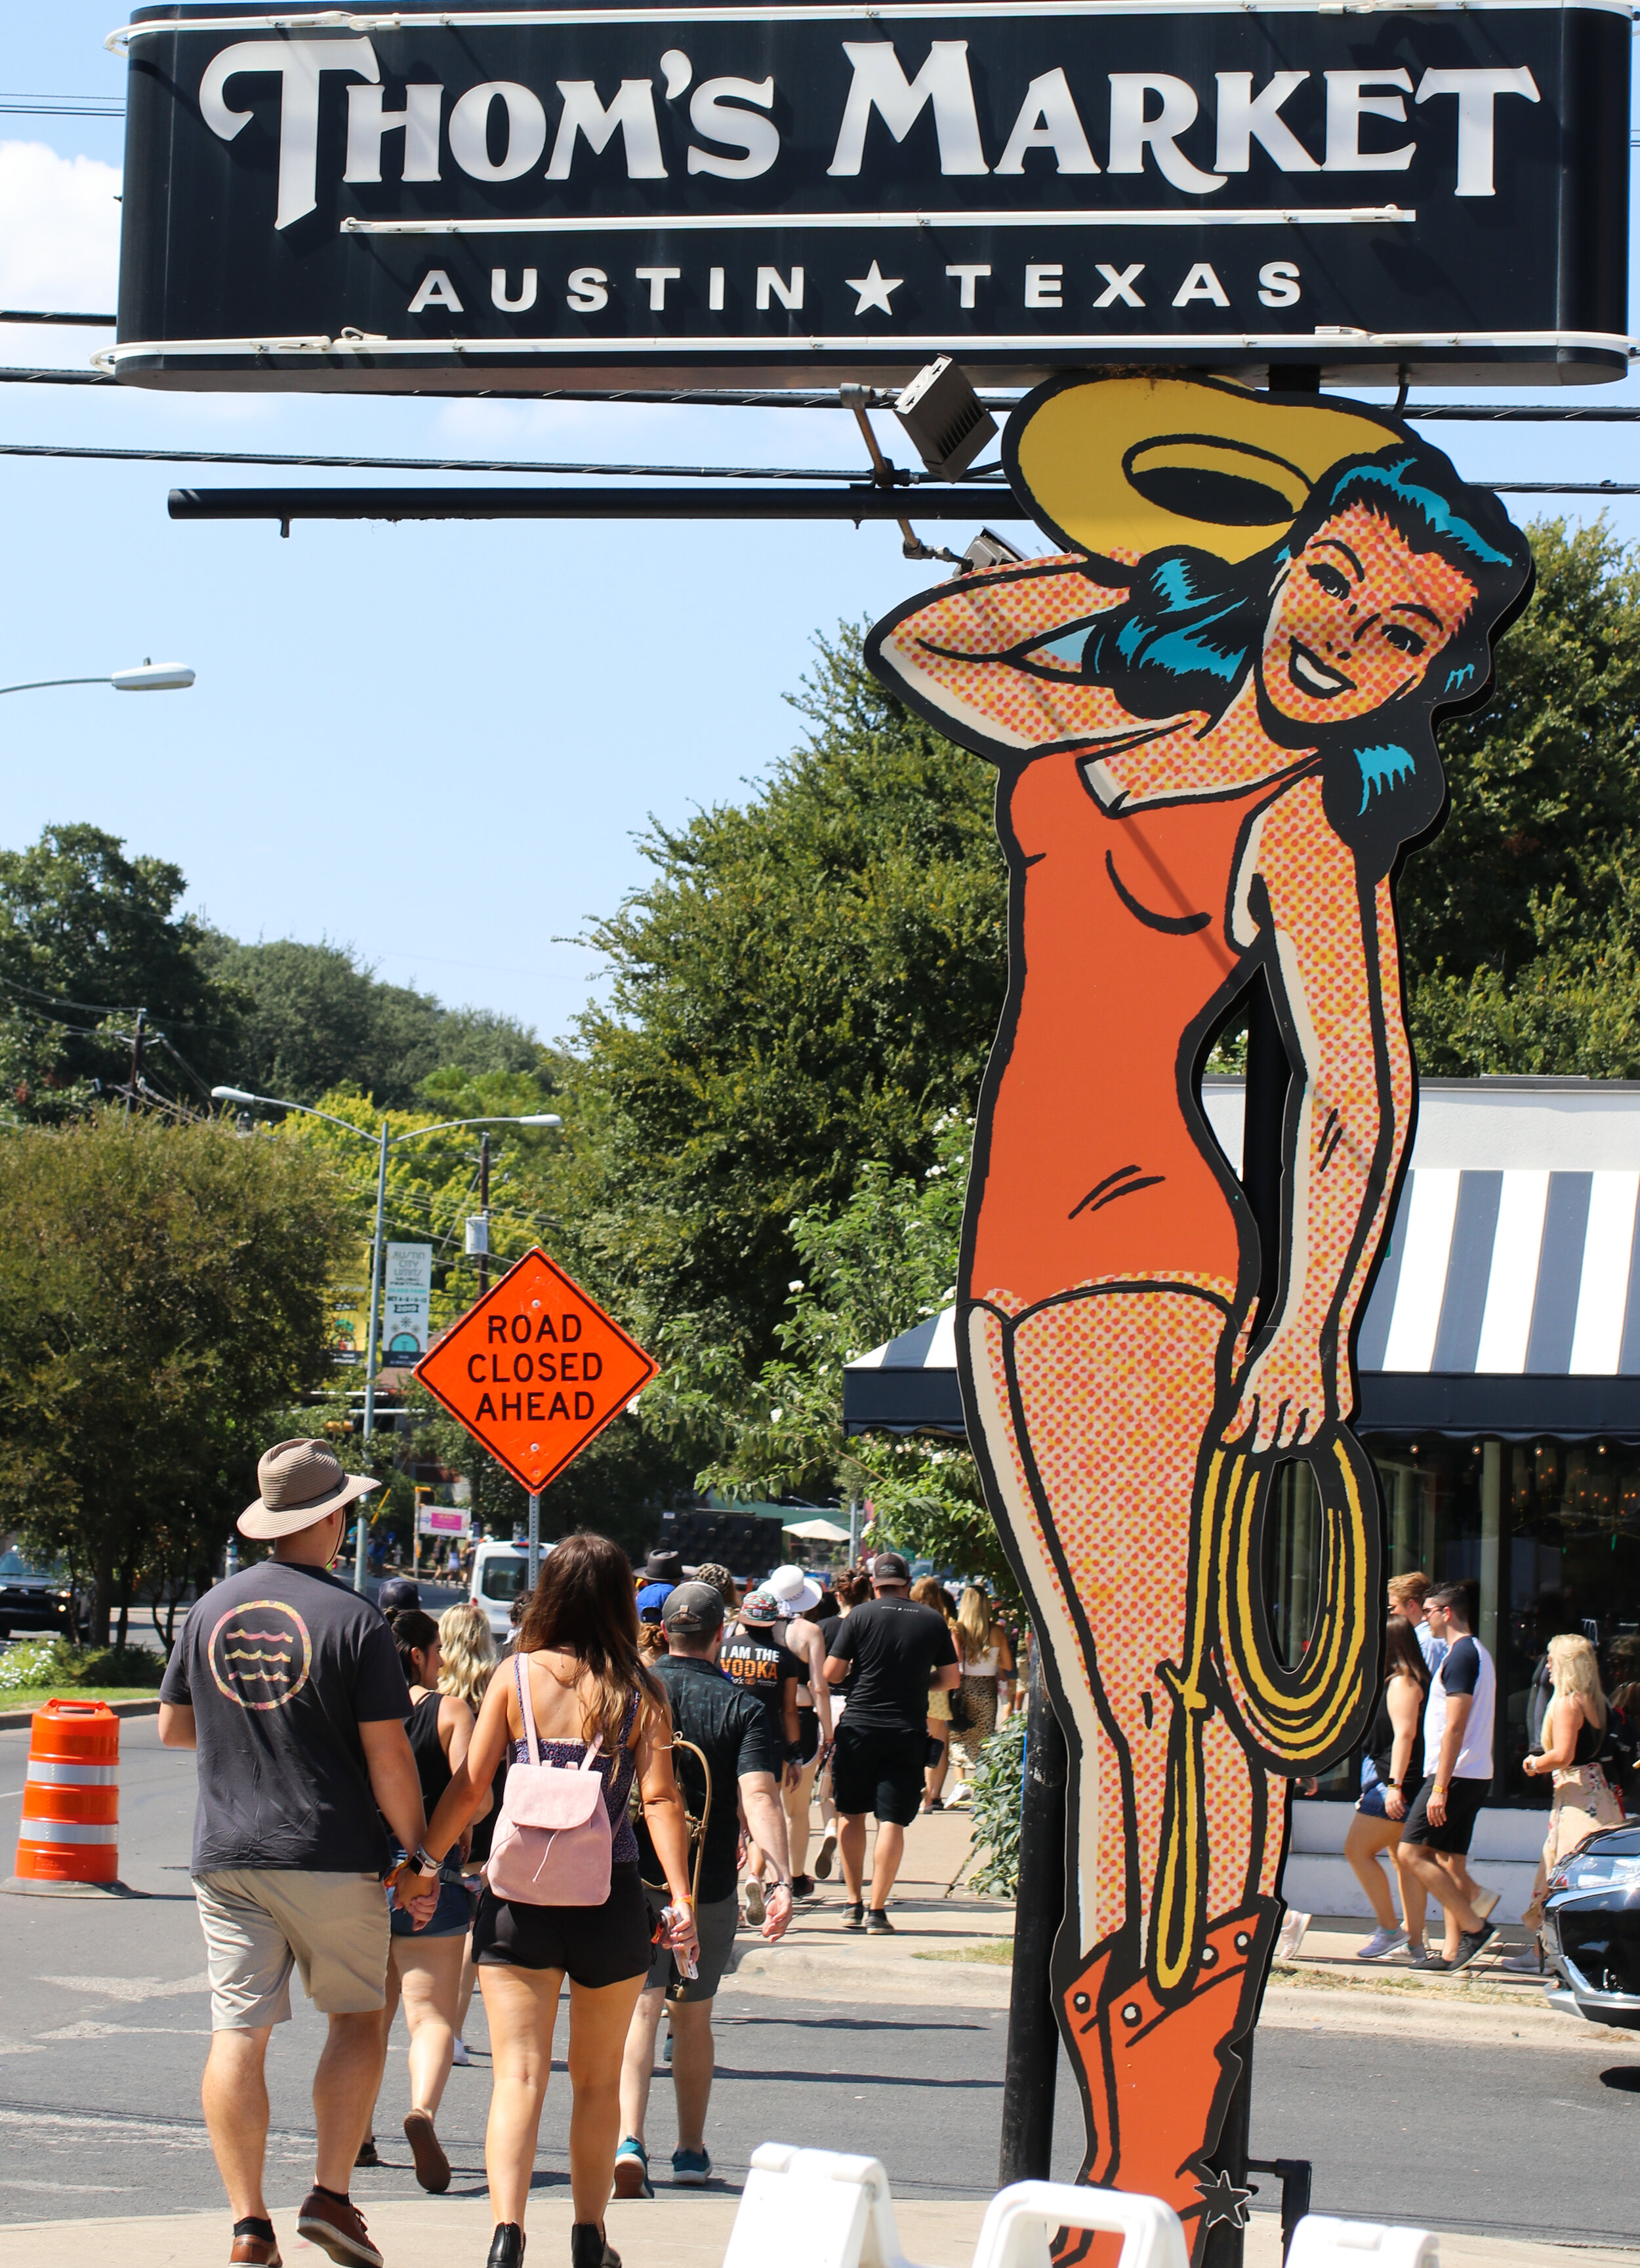  Festival guests walk past Thom’s Market on Barton Springs Road, heading to ACL Fest. 